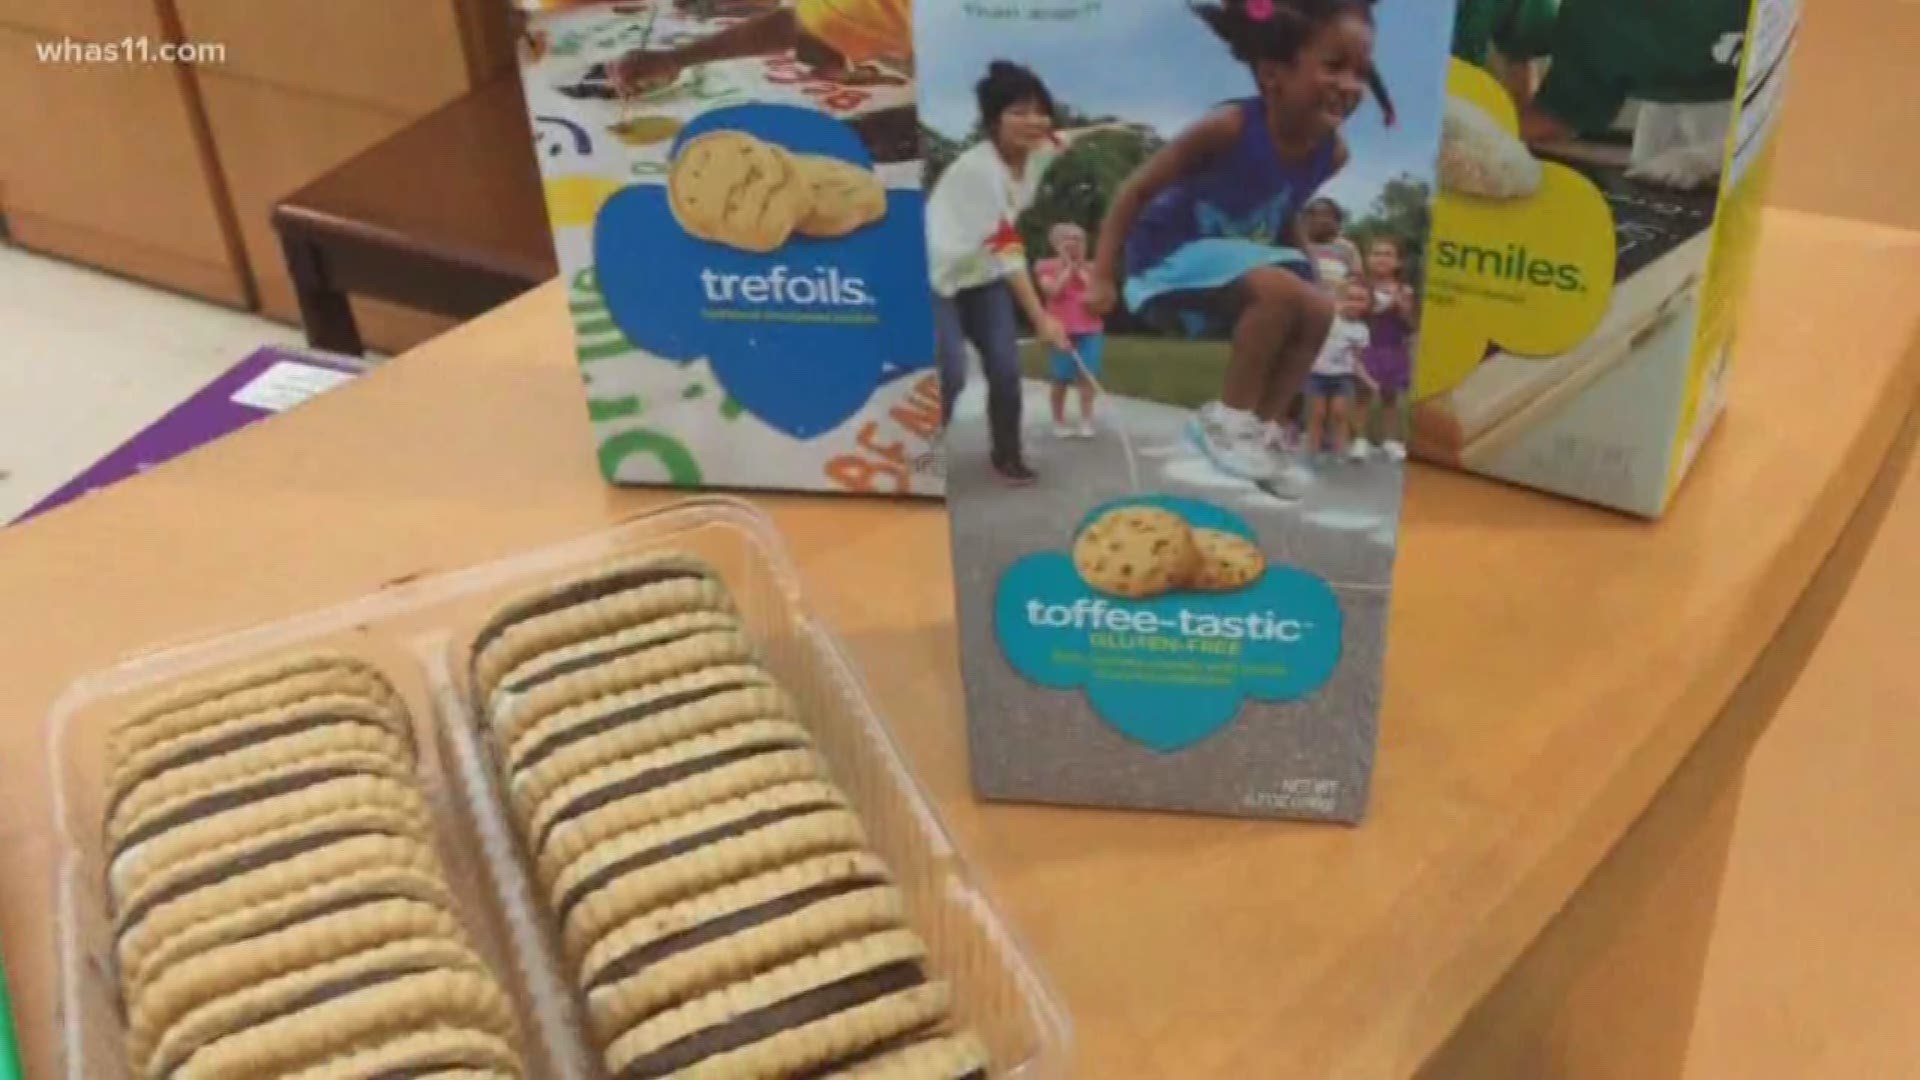 More than ten varieties of cookies are being sold and they include favorites like Thin Mints, Samoas, and Tagalongs.